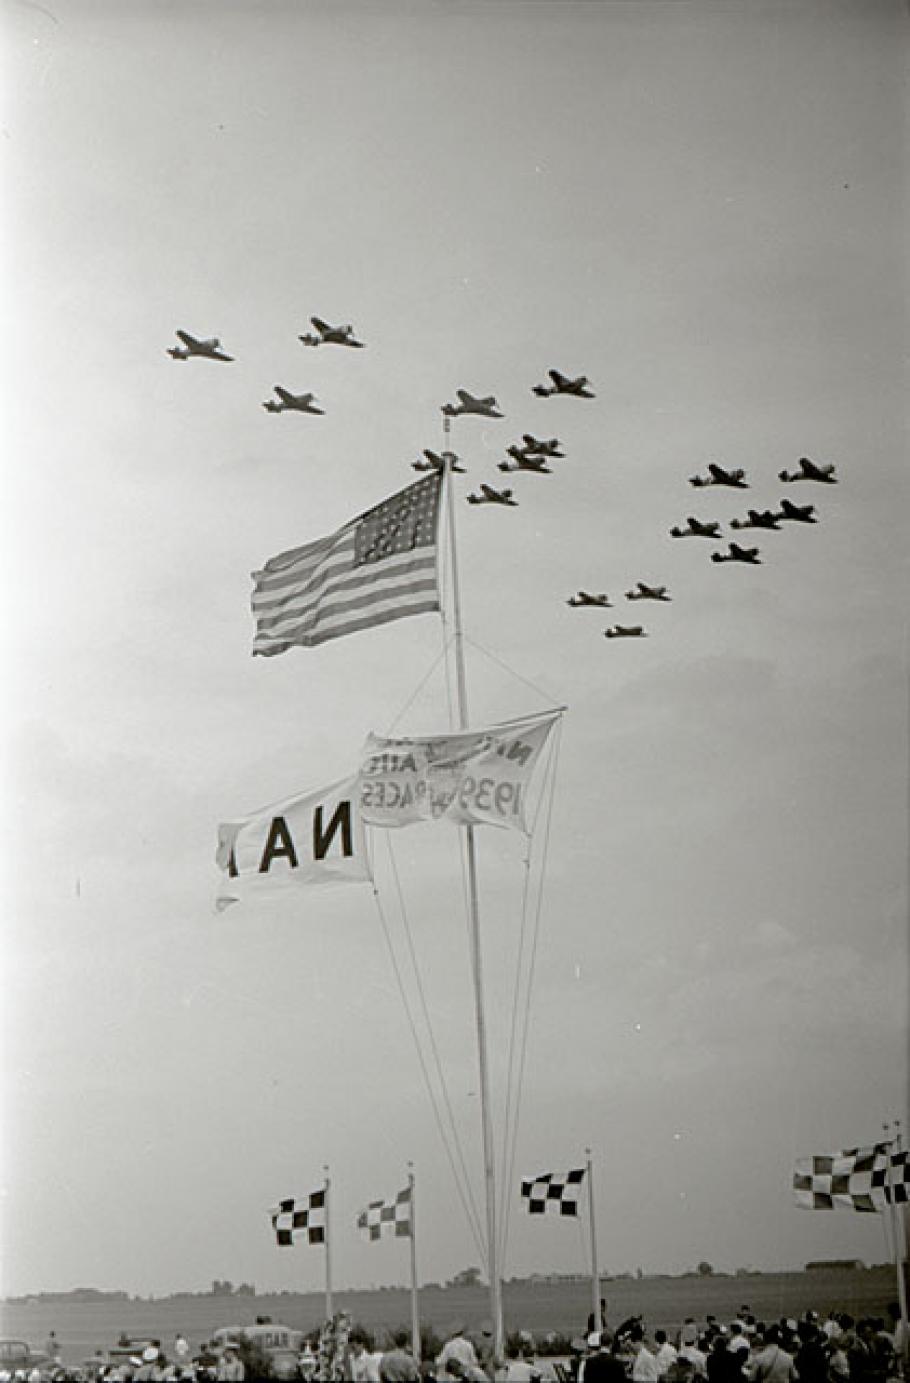 Formation of airplanes fly past American flag. Spectators can seen at bottom.